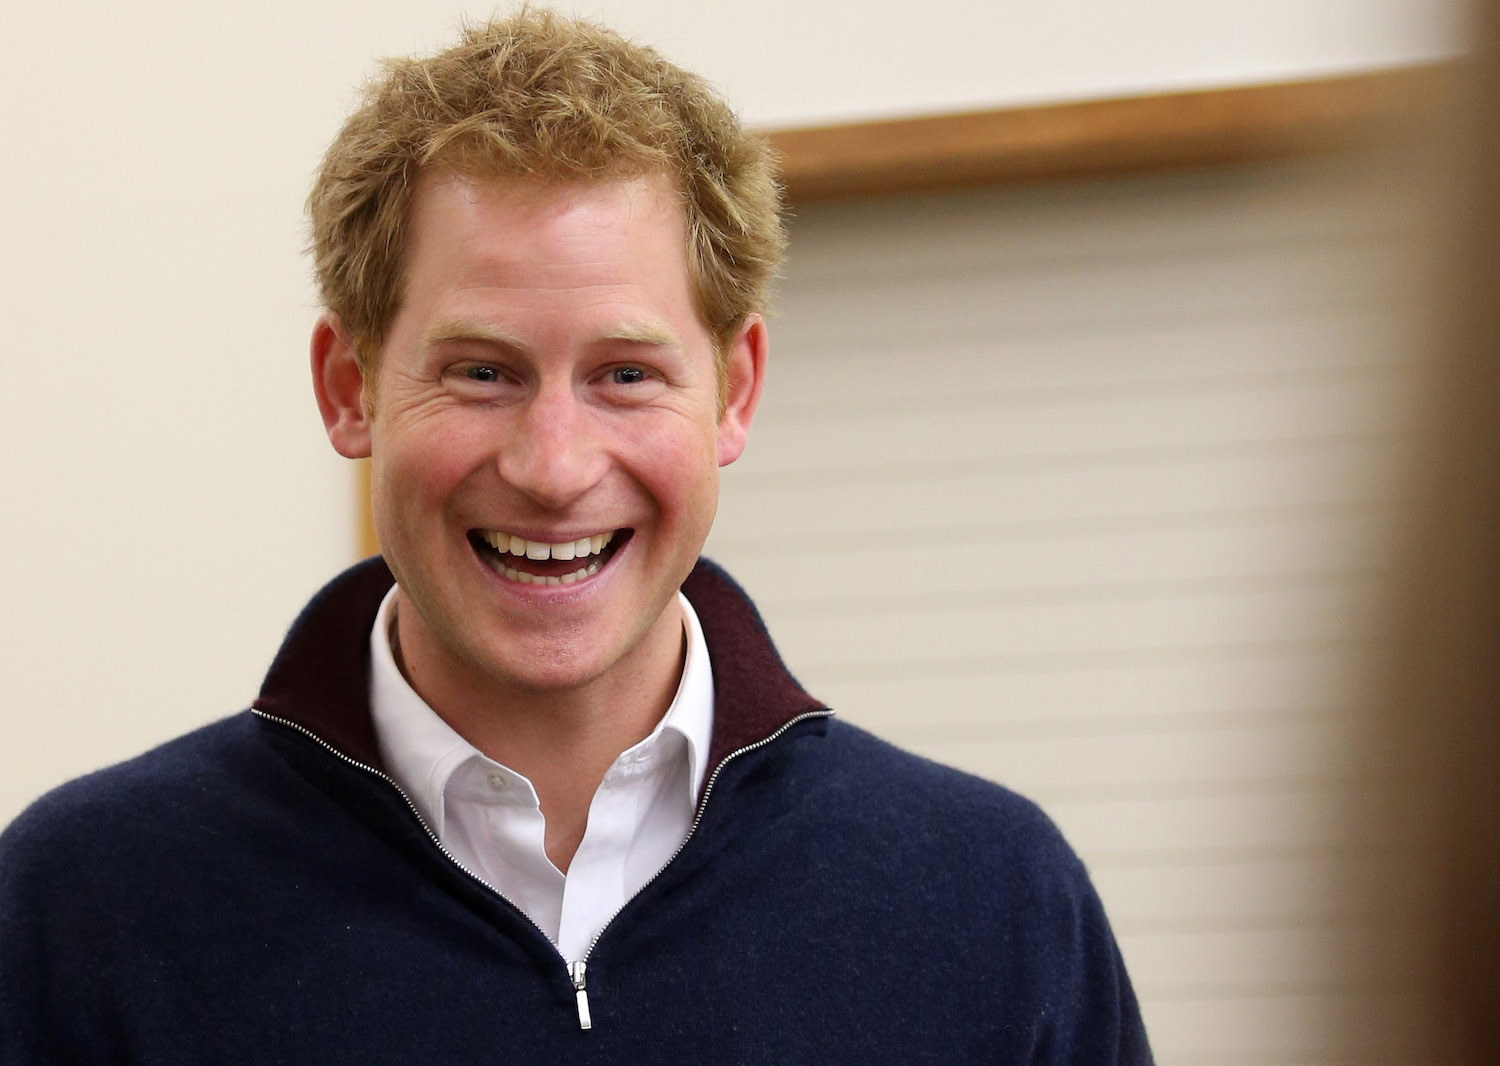 Prince Harry Jokes With Boy About Naked Las Vegas Romp At 